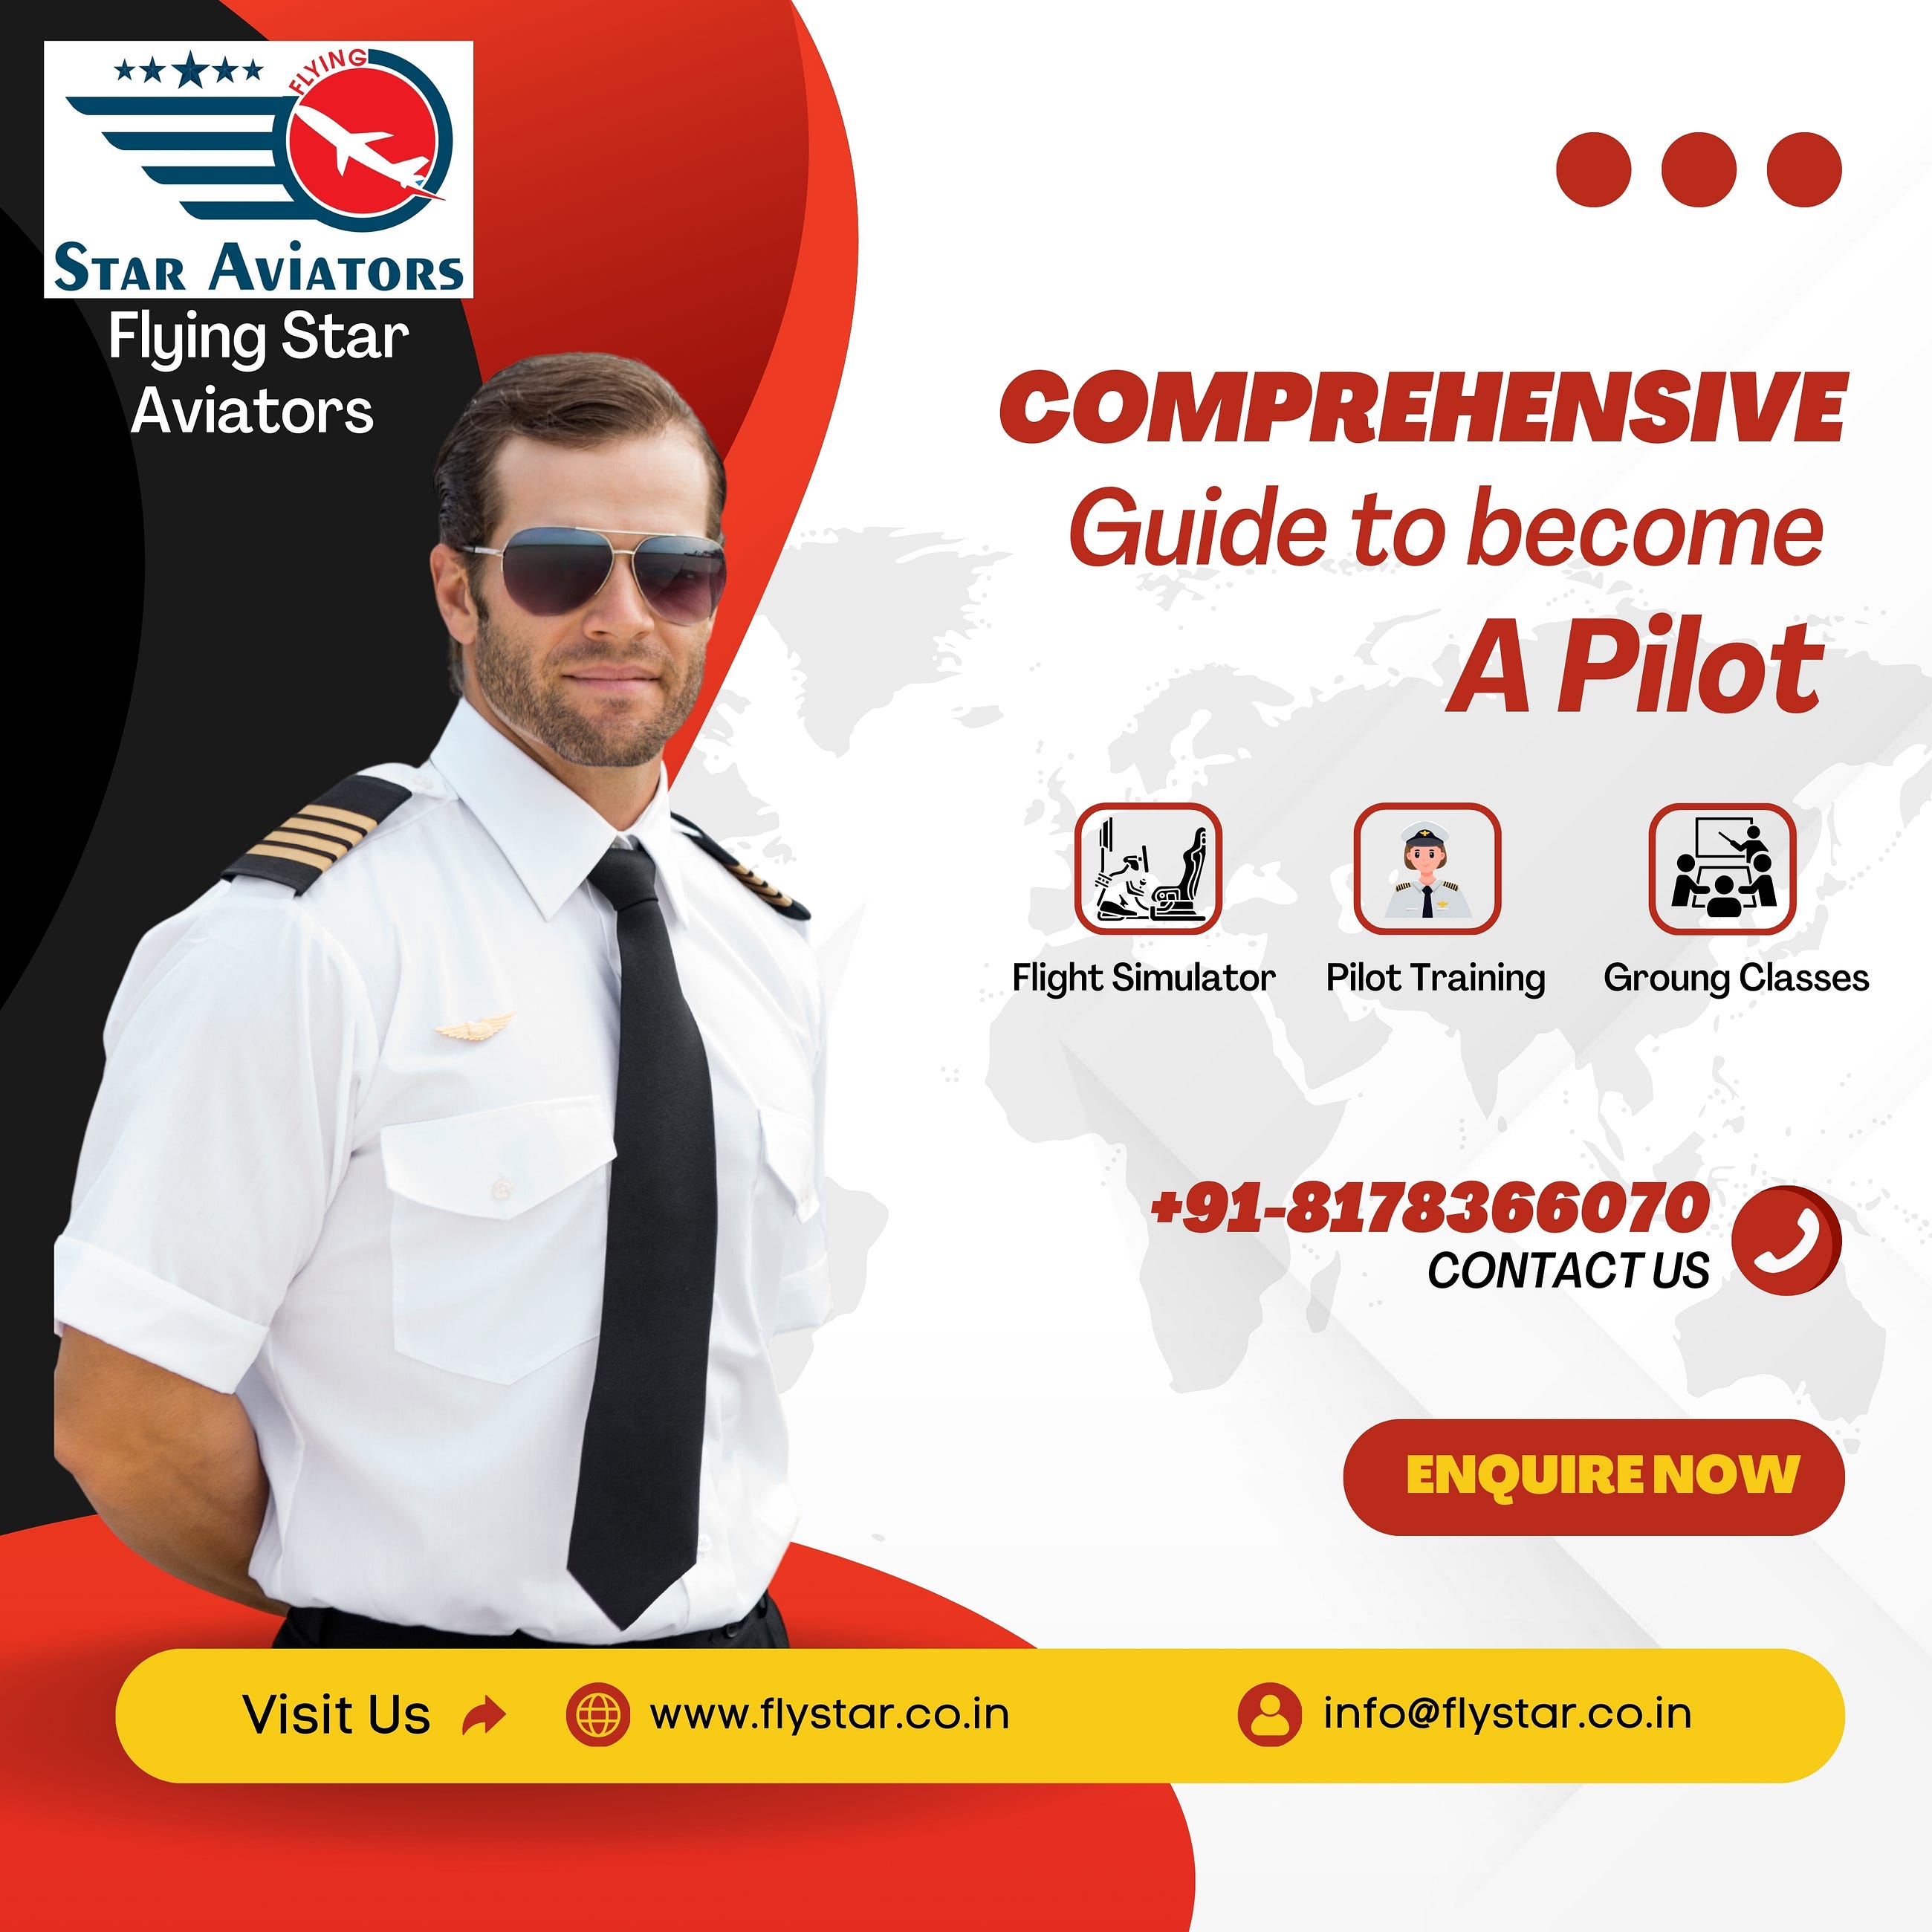 Your Comprehensive Guide to Becoming a Pilot with Flying Star Aviators